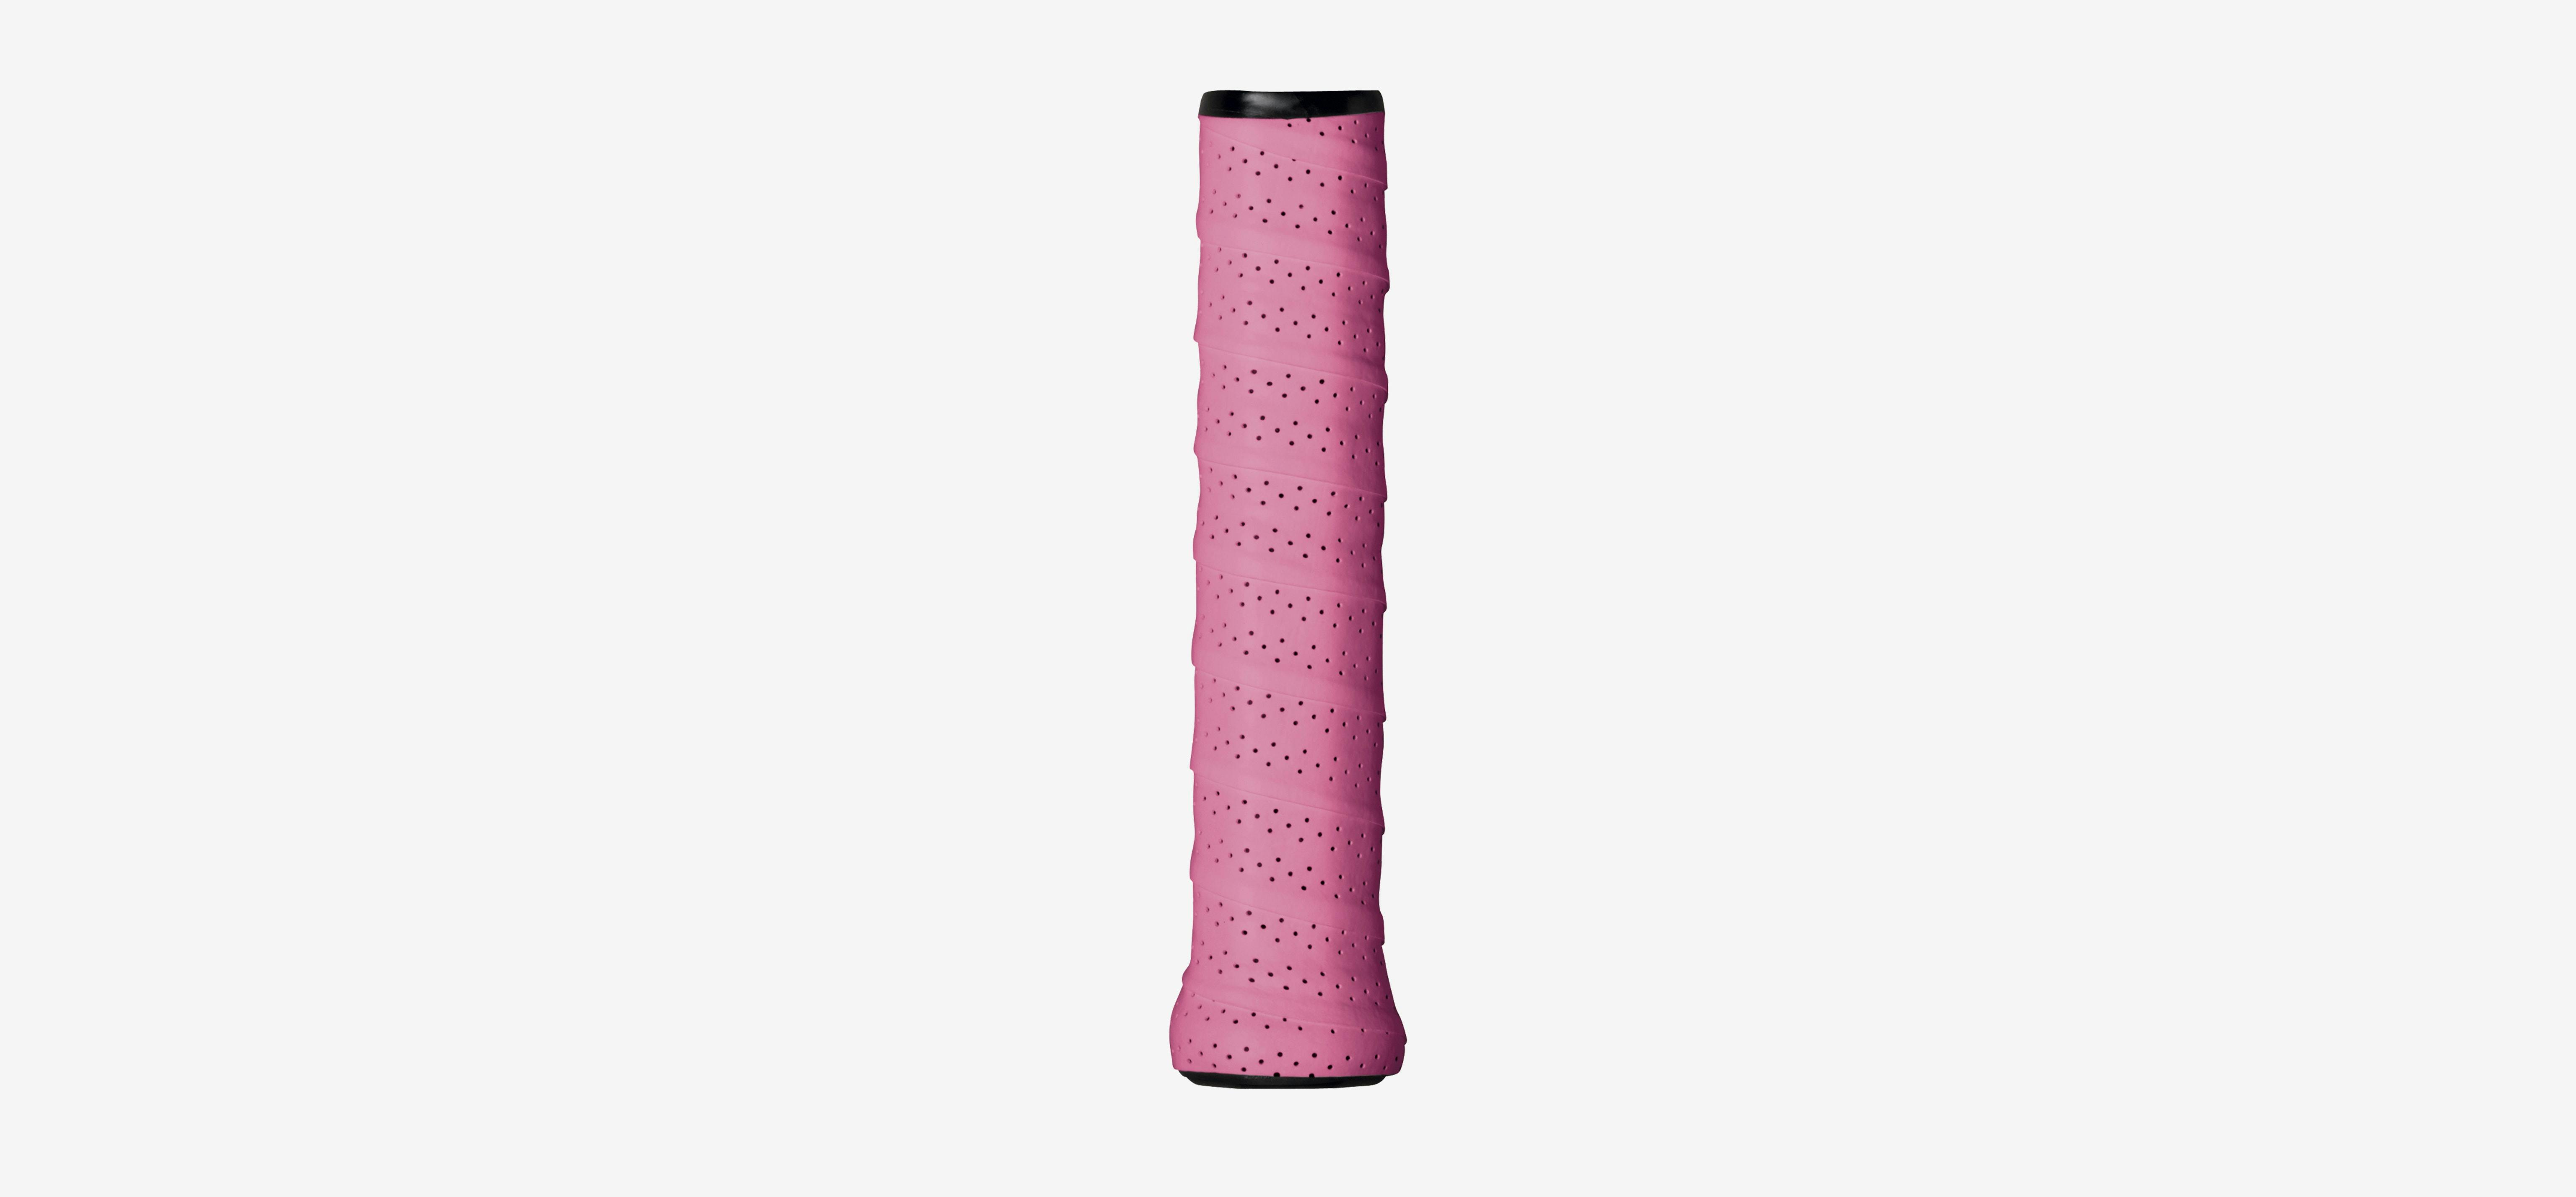 Wilson Pro Perforated 3-pack overgrip –